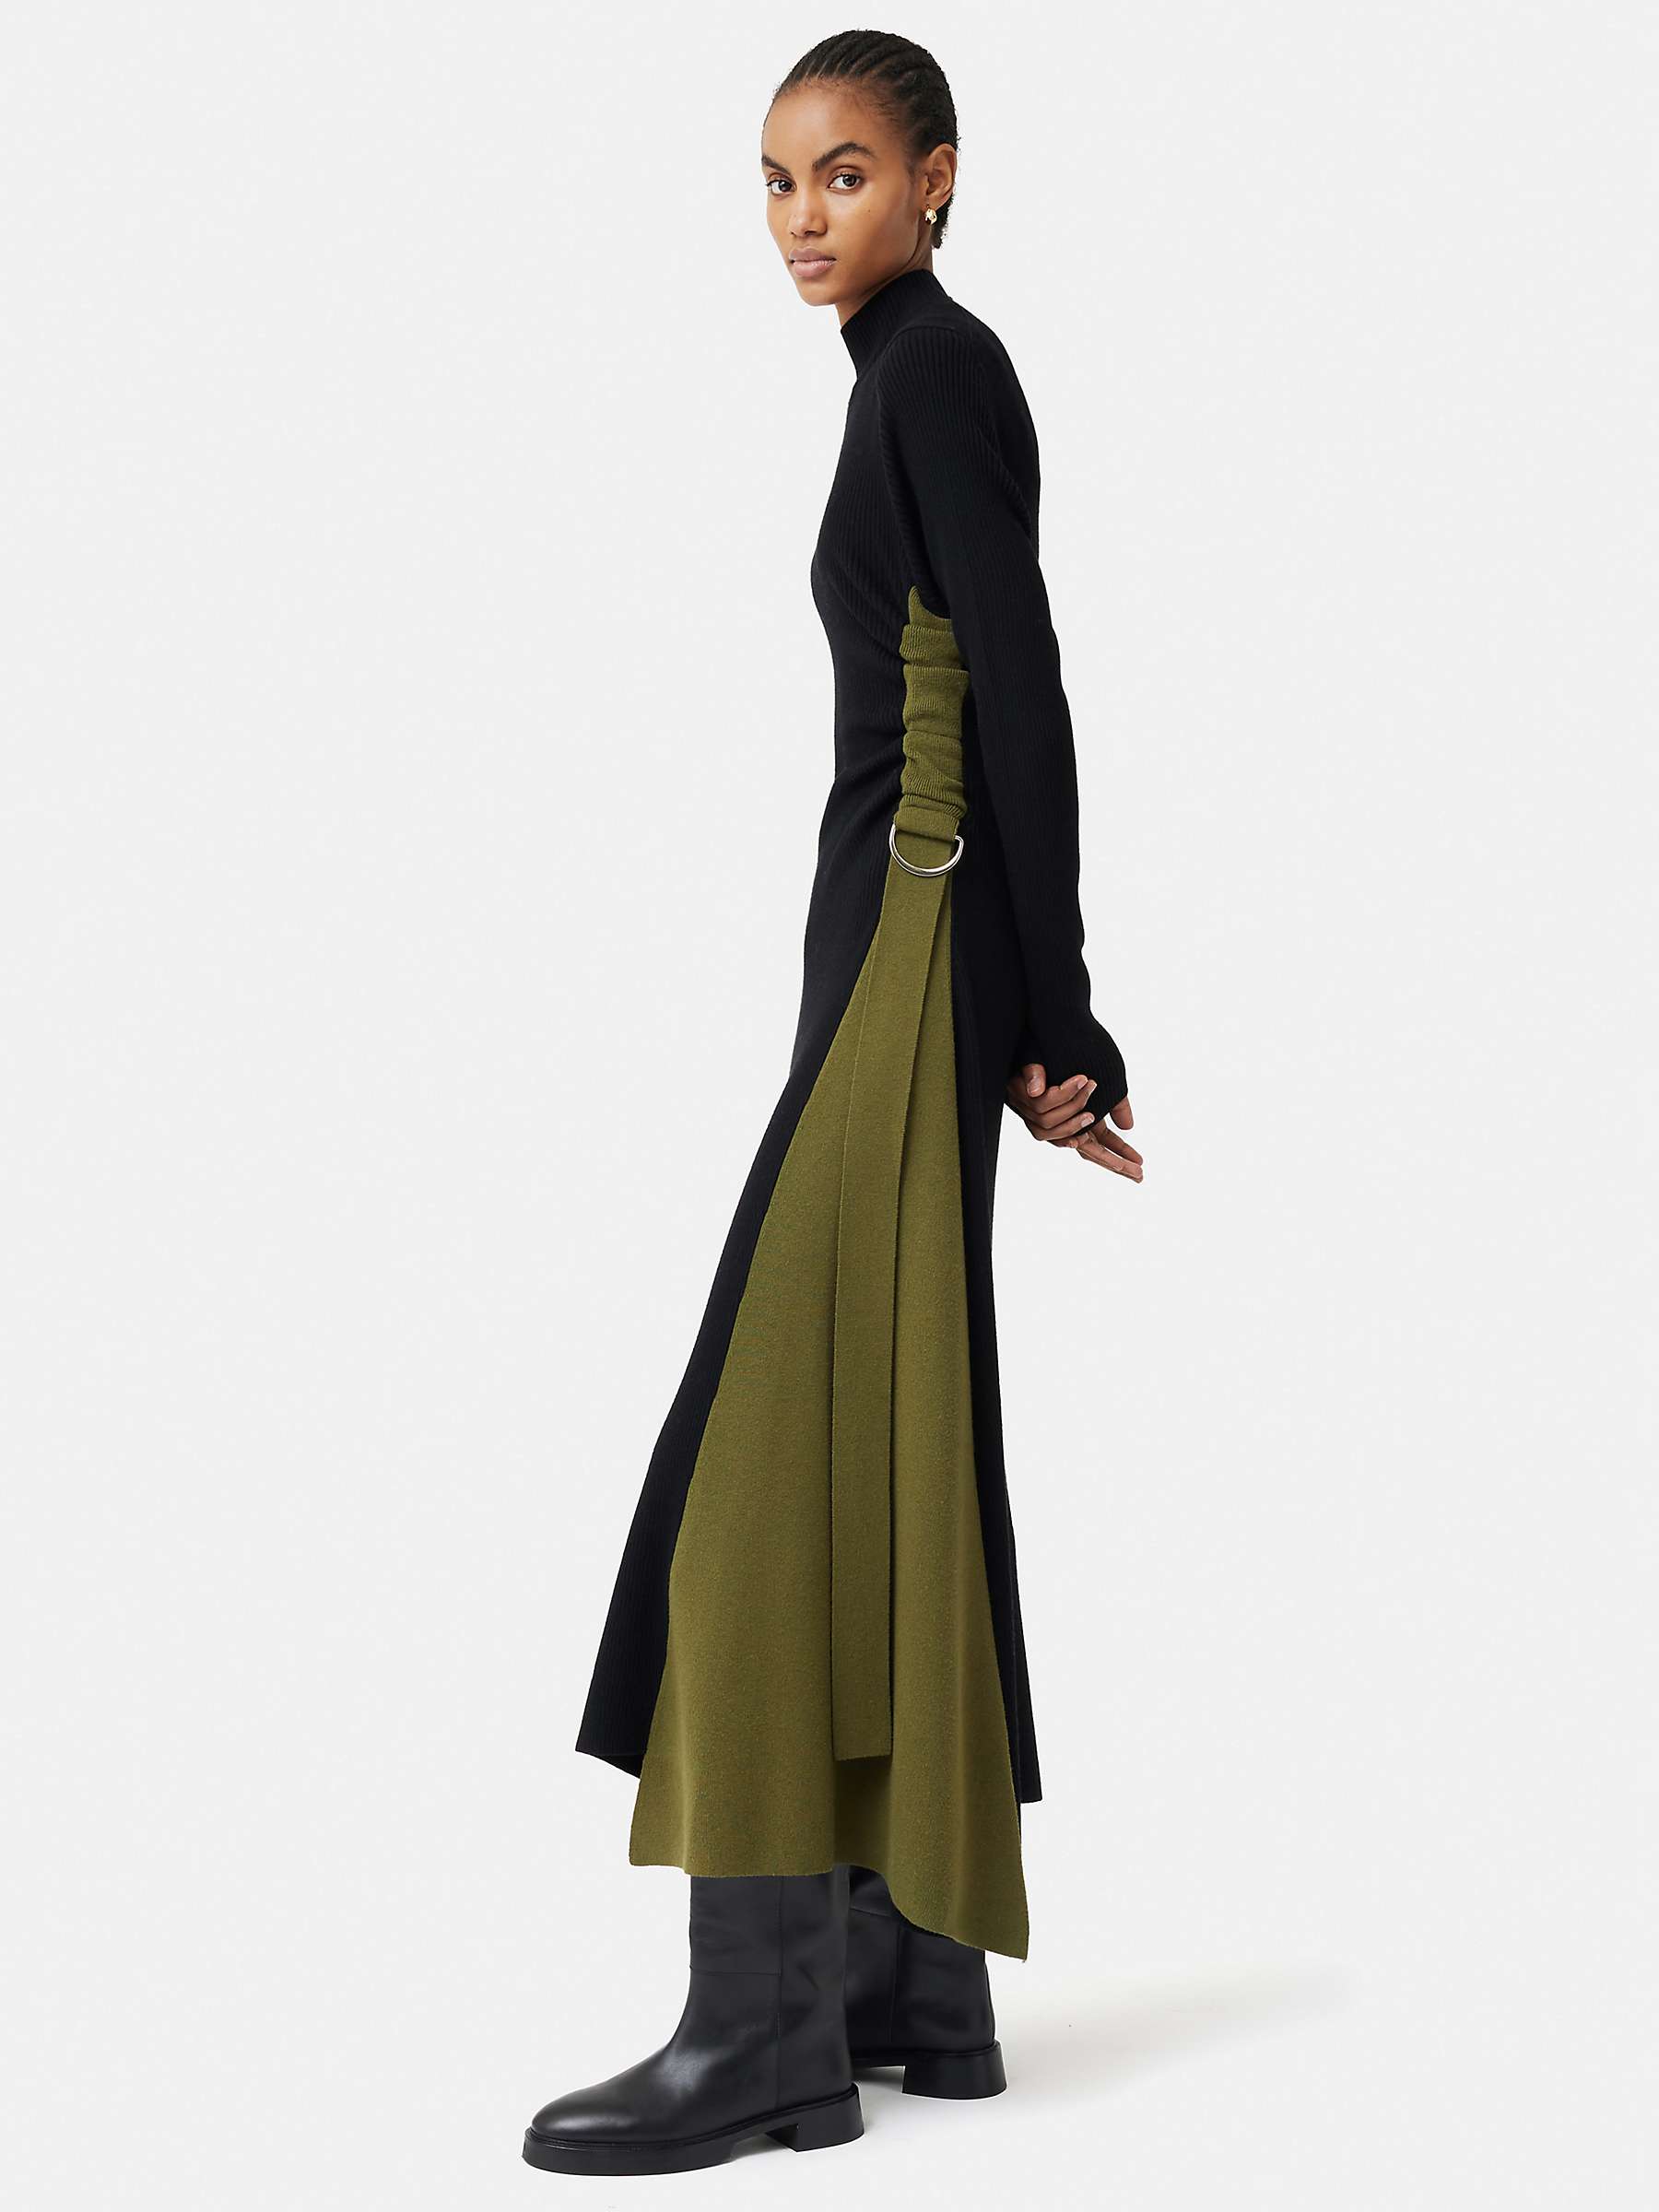 Buy Jigsaw D-Ring Knitted Wool Blend Maxi Dress, Black/Olive Online at johnlewis.com